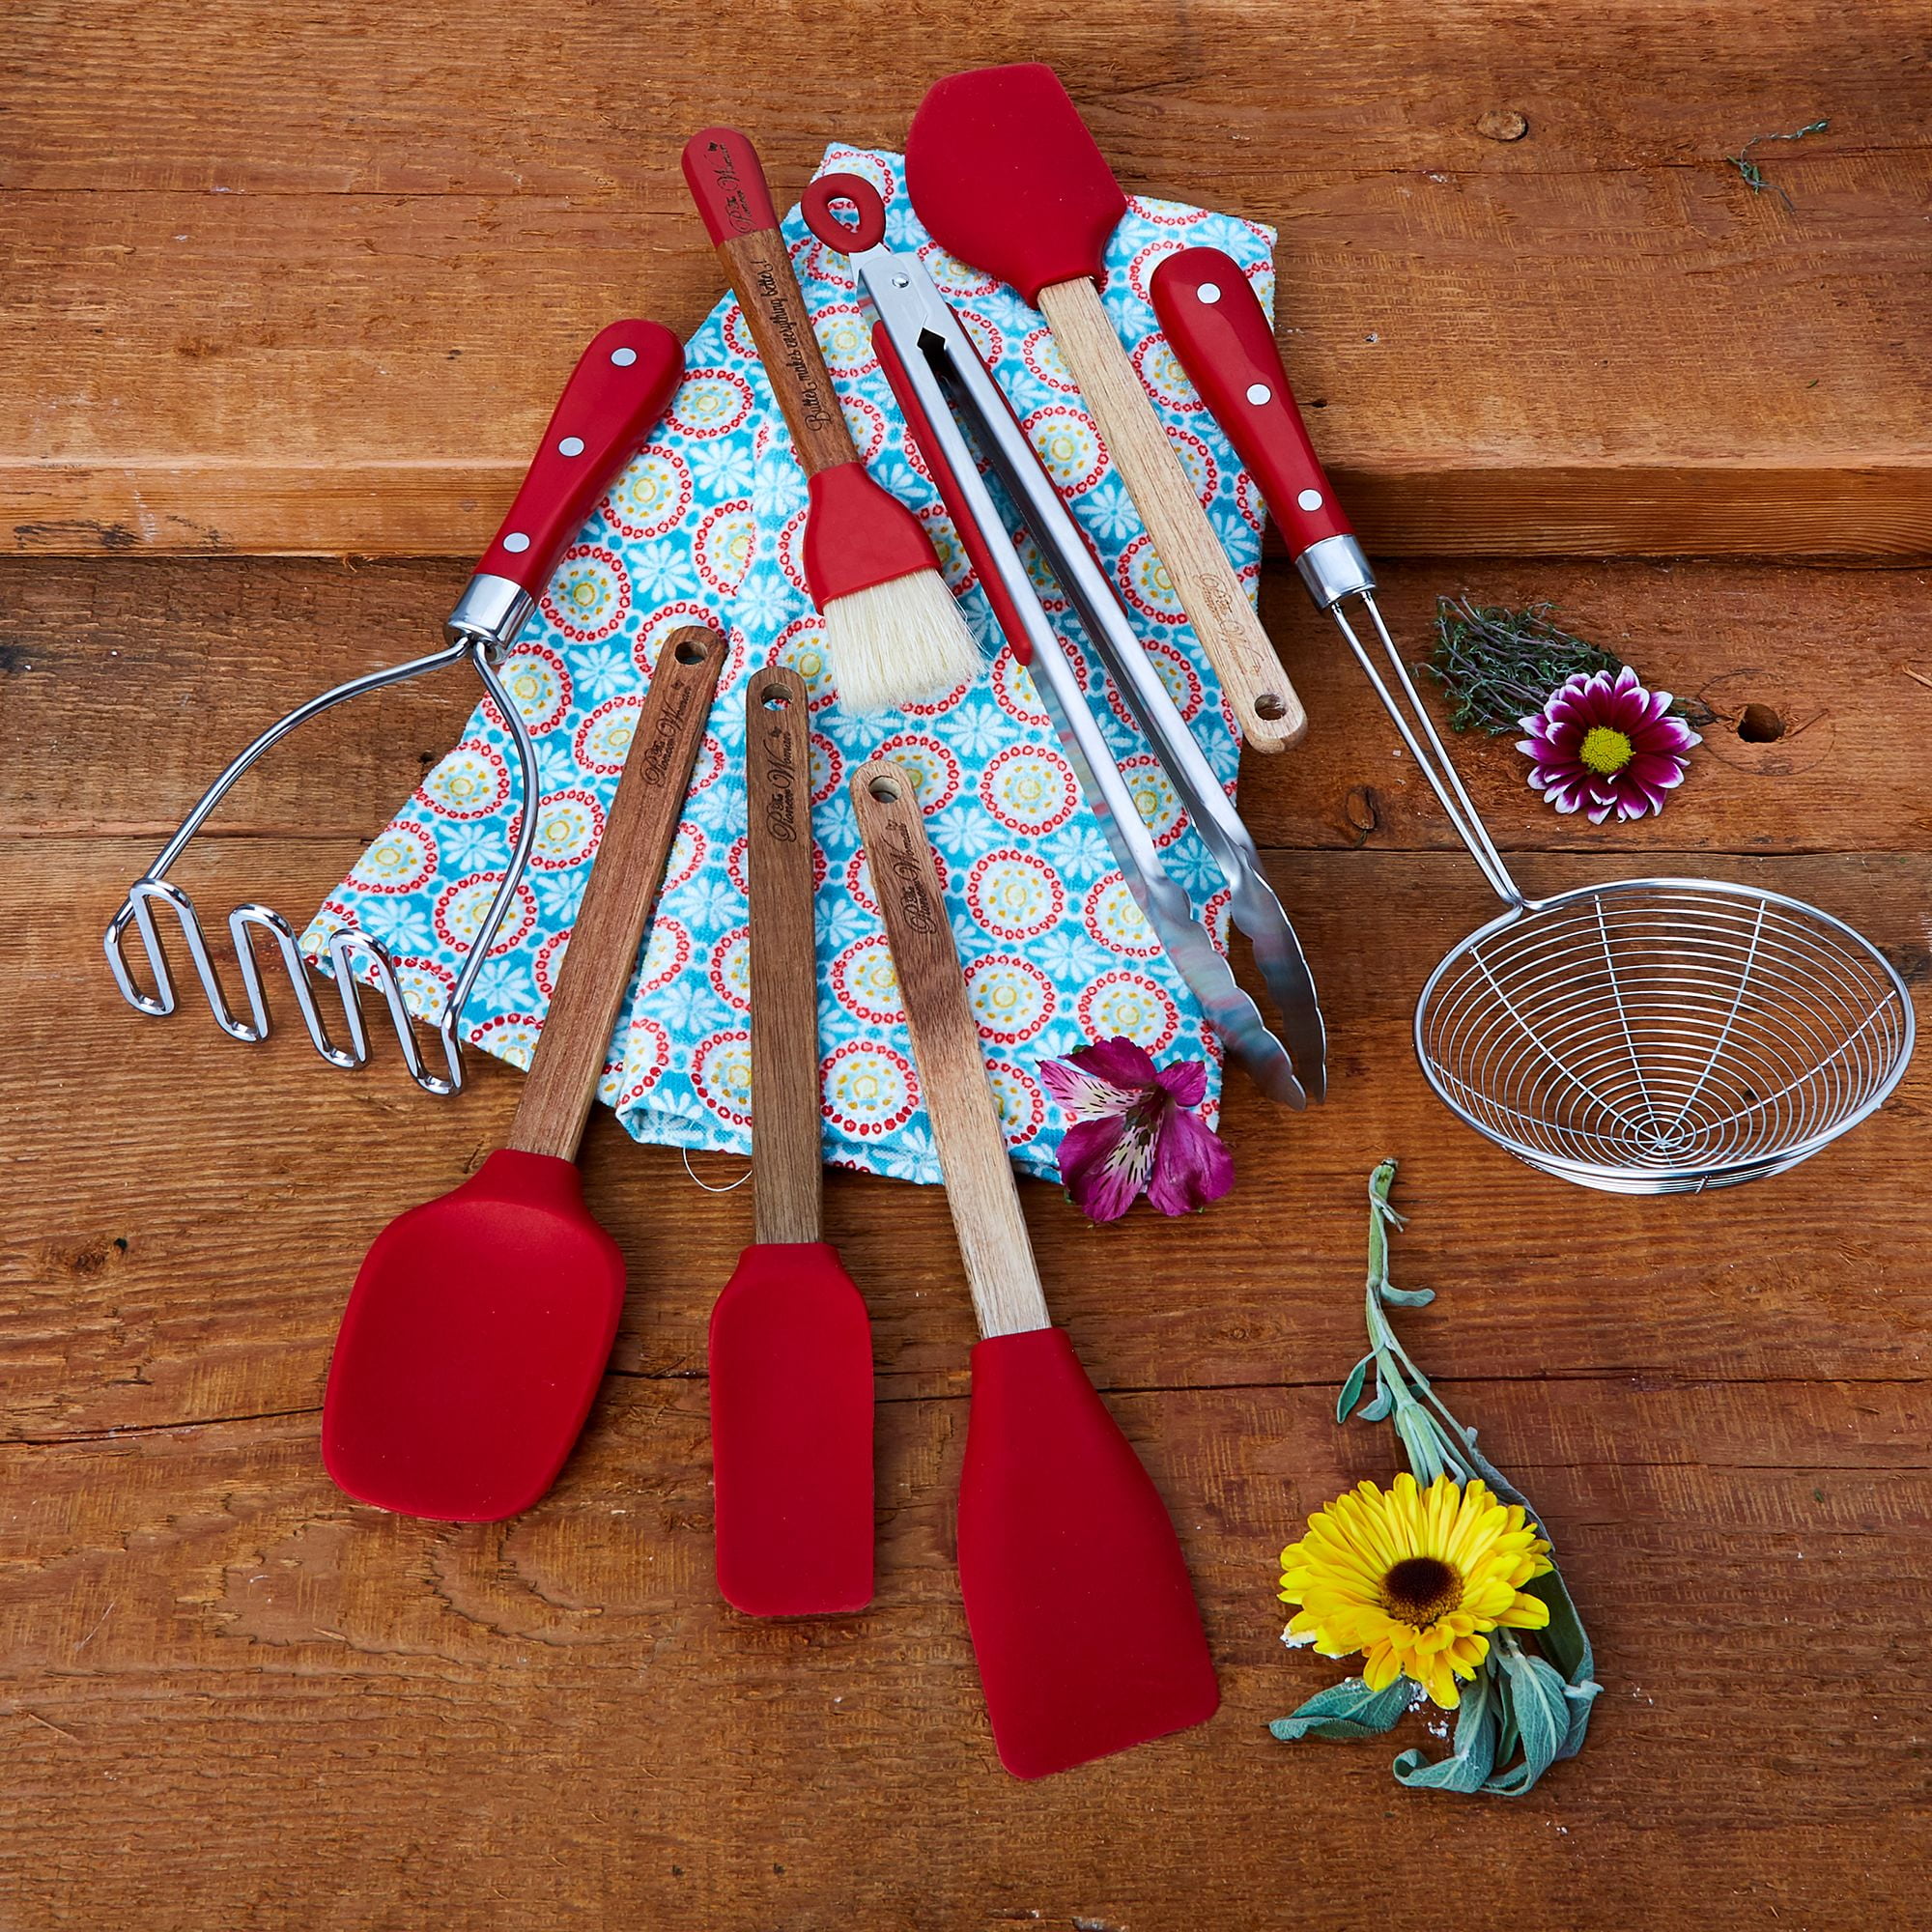 The Pioneer Woman Essential Cooking Tools